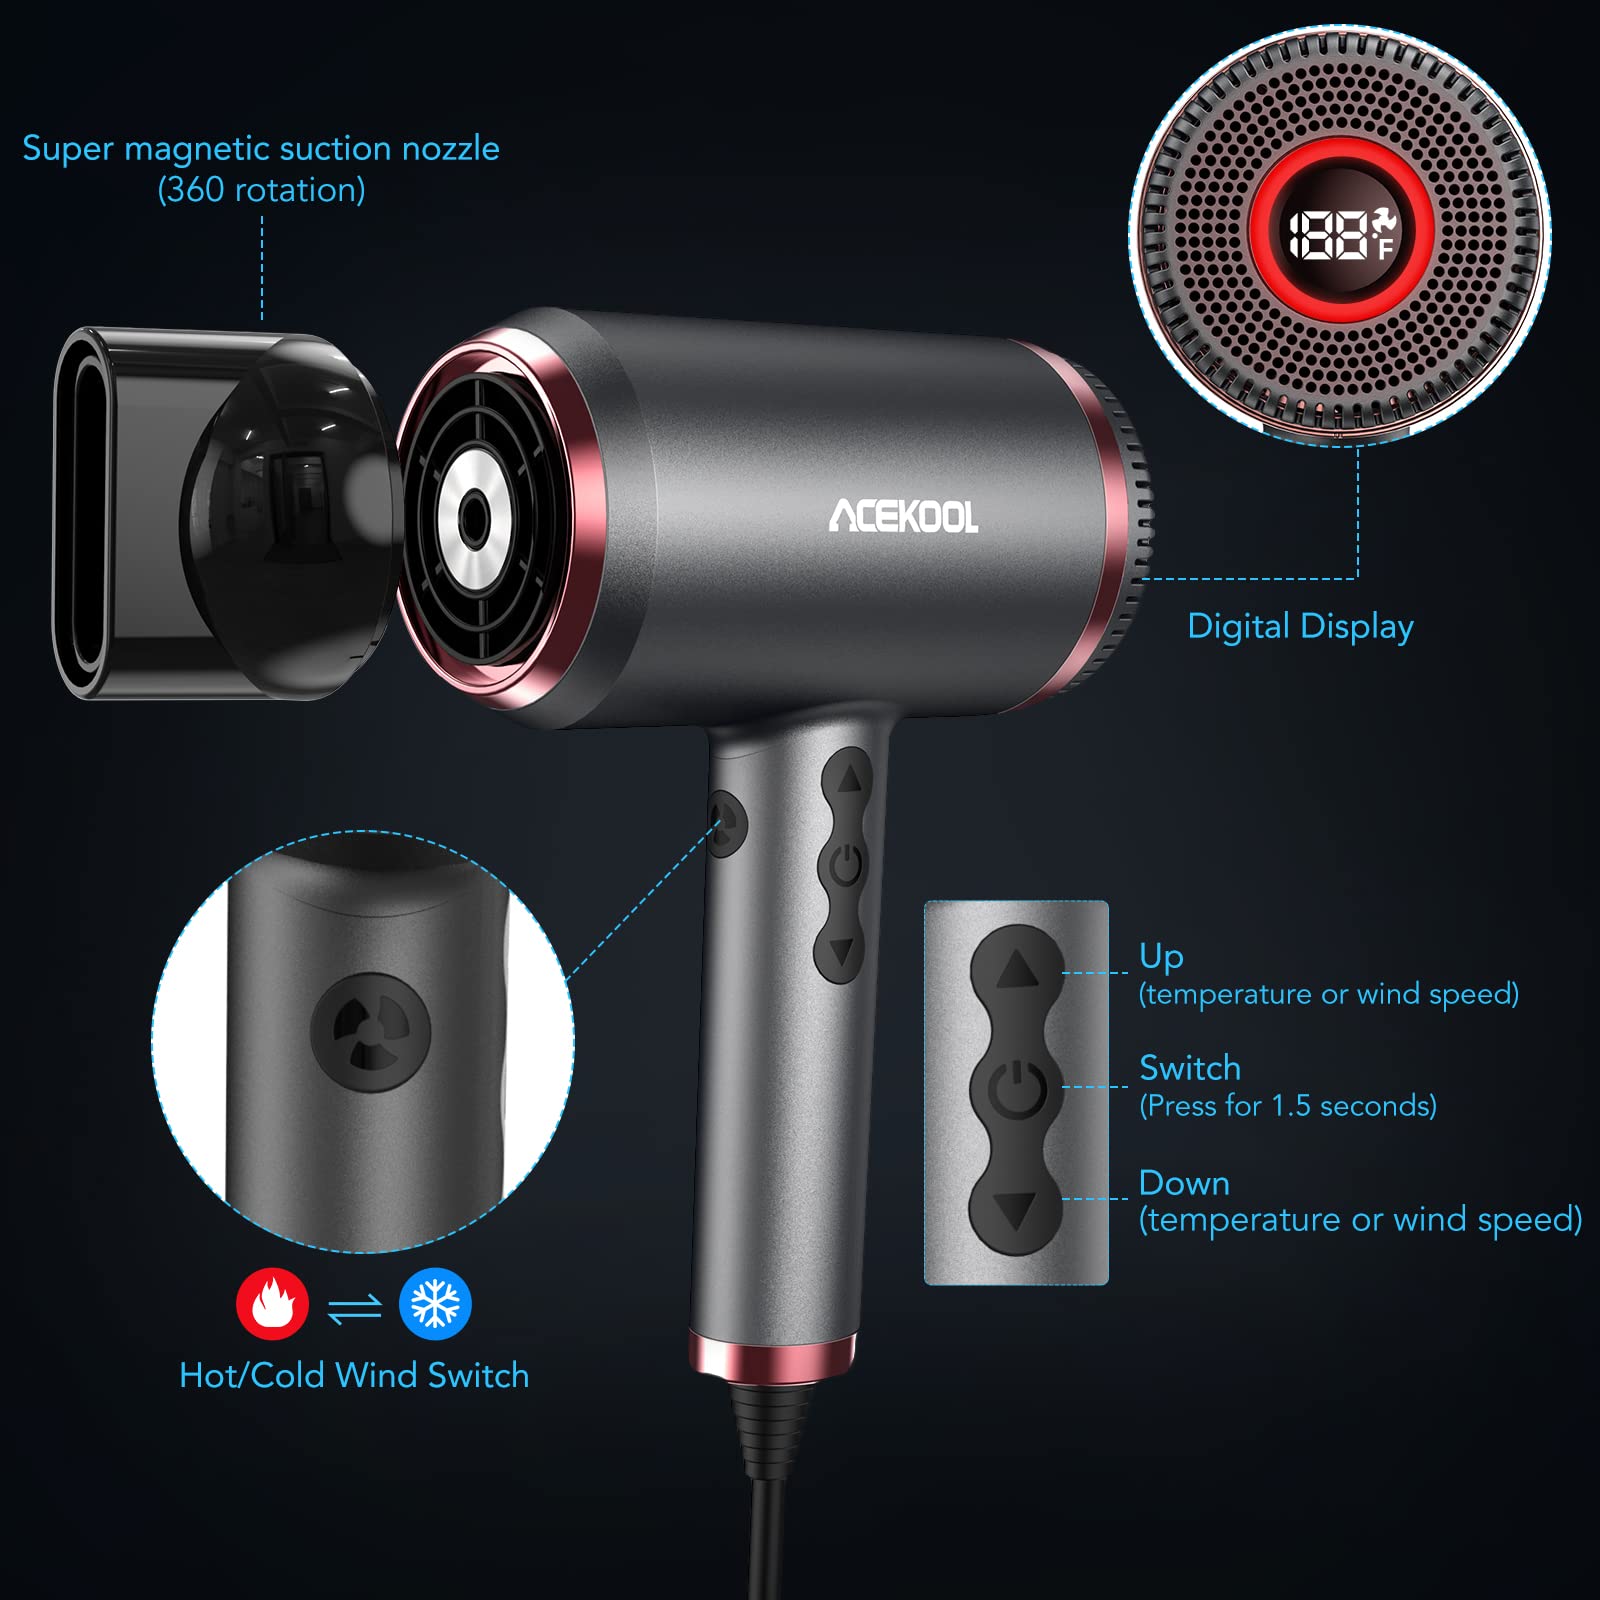 ACEKOOL Ionic Hair Dryer HB1 Blow Dryer with LED Display